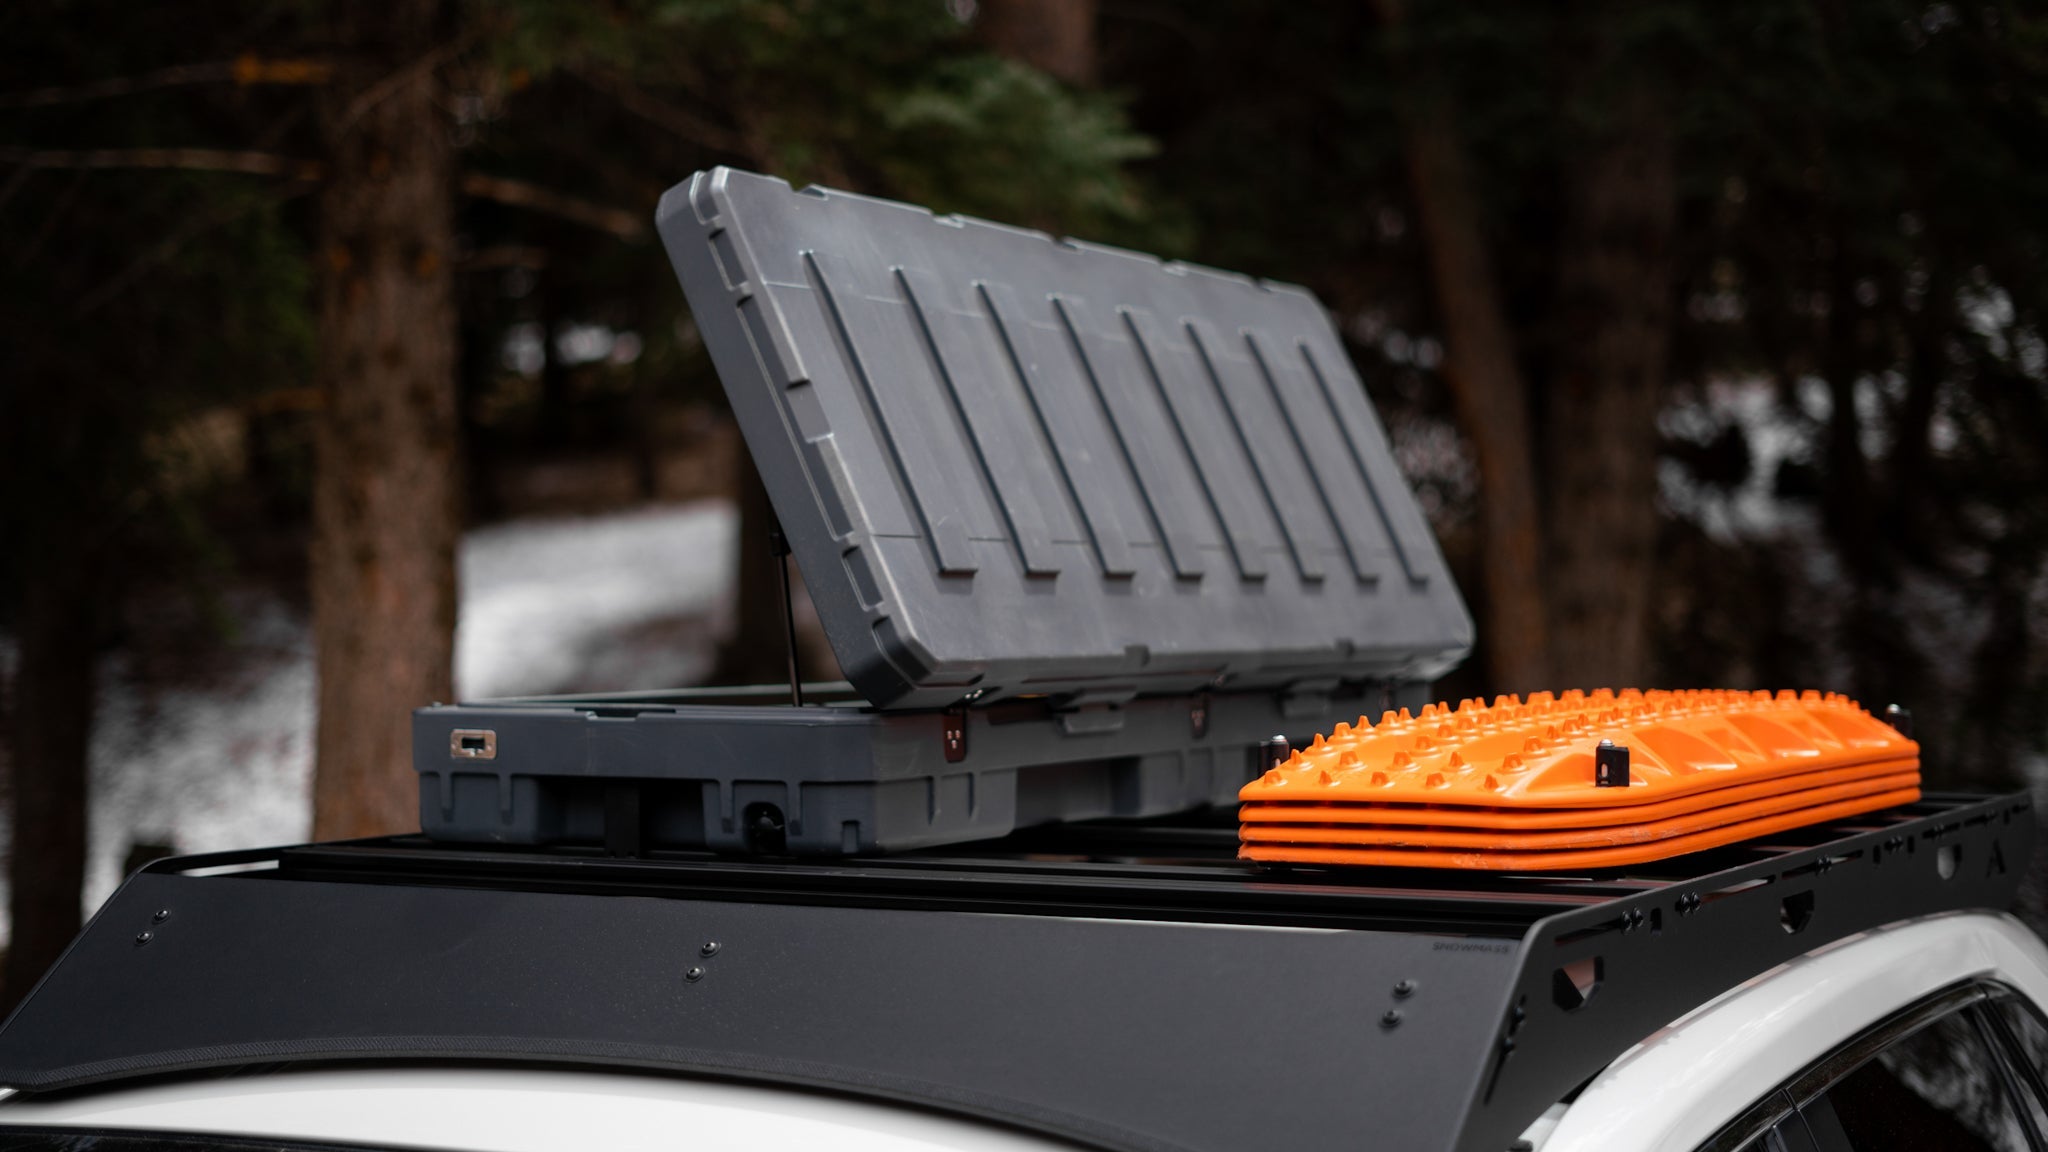 Toyota Rav4 Roof Rack Eye level front view of rack on vehicle with opened container on top